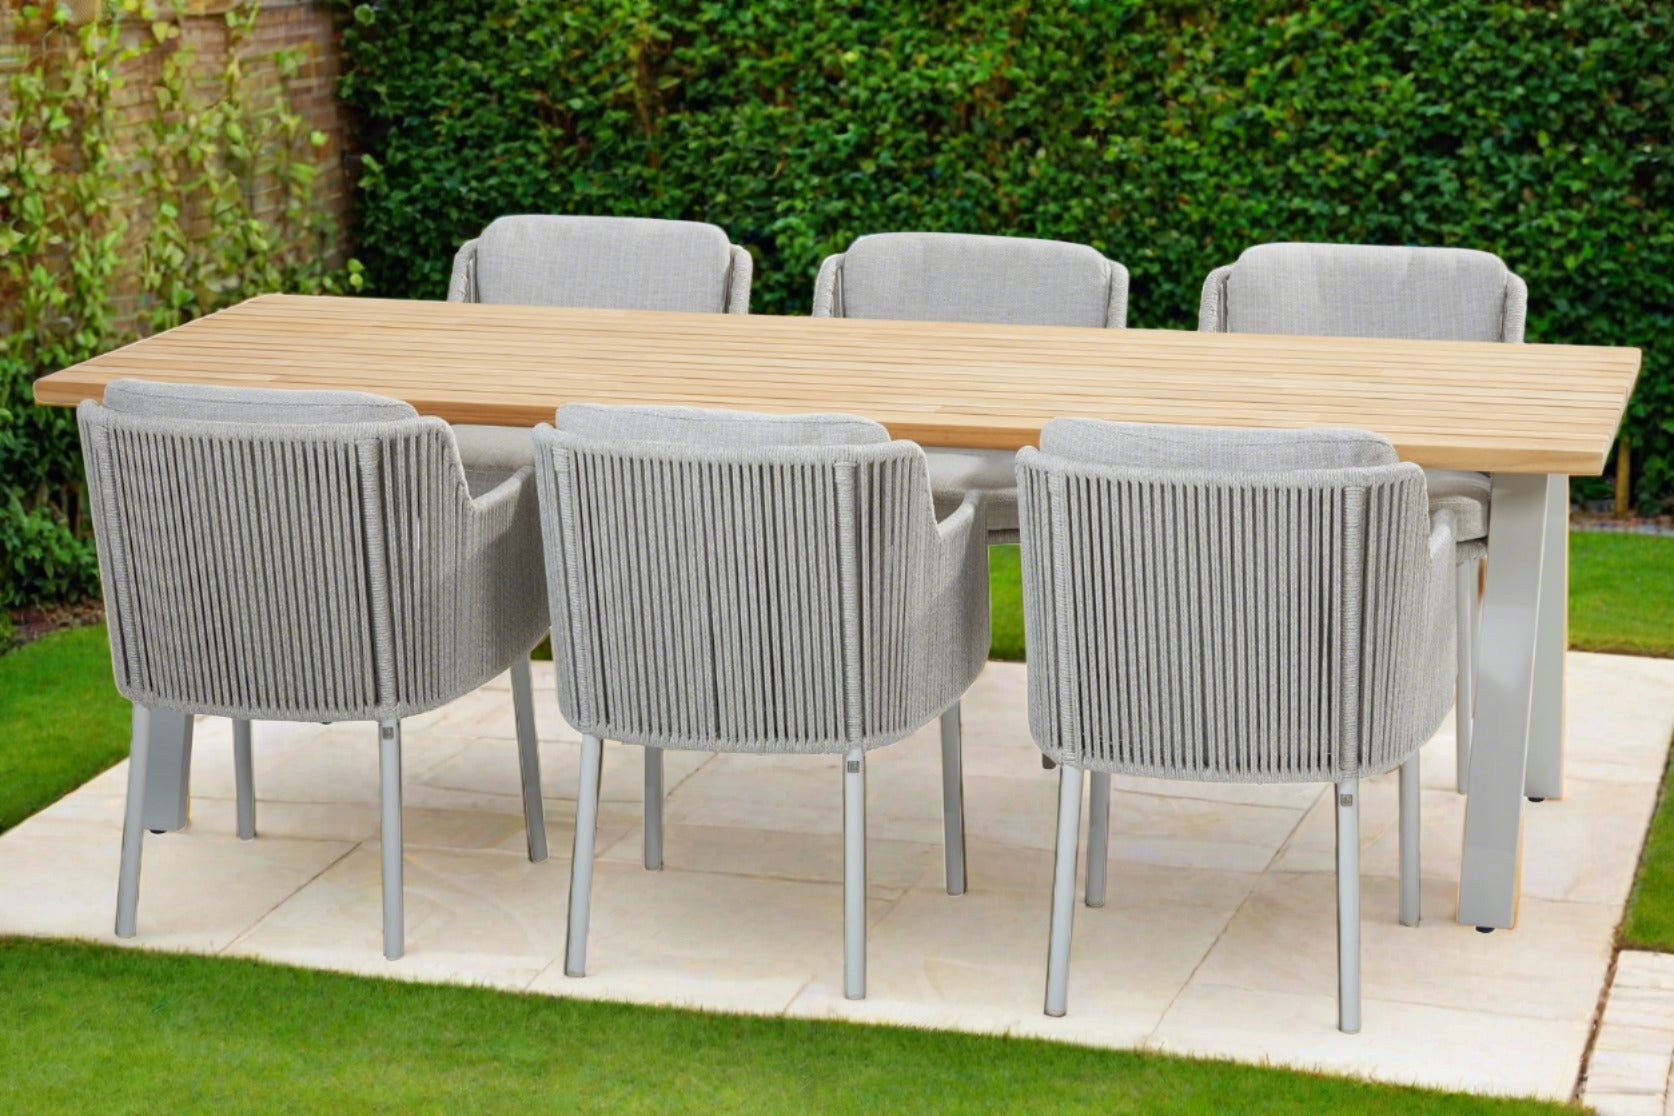 Bernini 6 Seat Outdoor Dining Set by 4 Seasons Outdoor